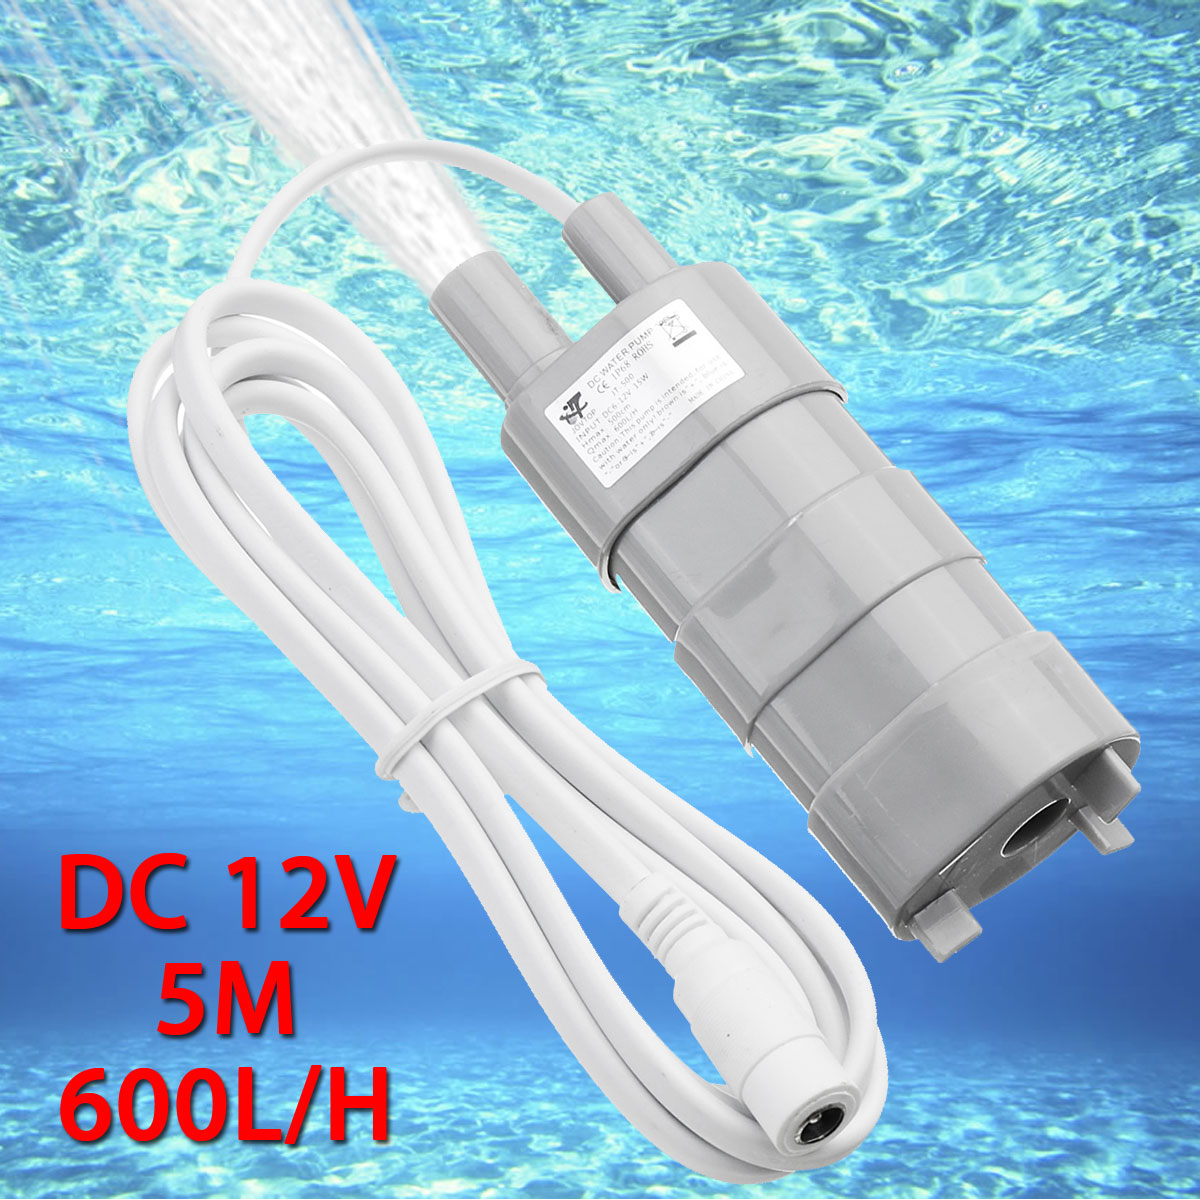 DC-12V-Pump-Solar-Brushless-Magnetic-Submersible-Water-Pump-5M-600LH-Fish-Pond-1302586-1